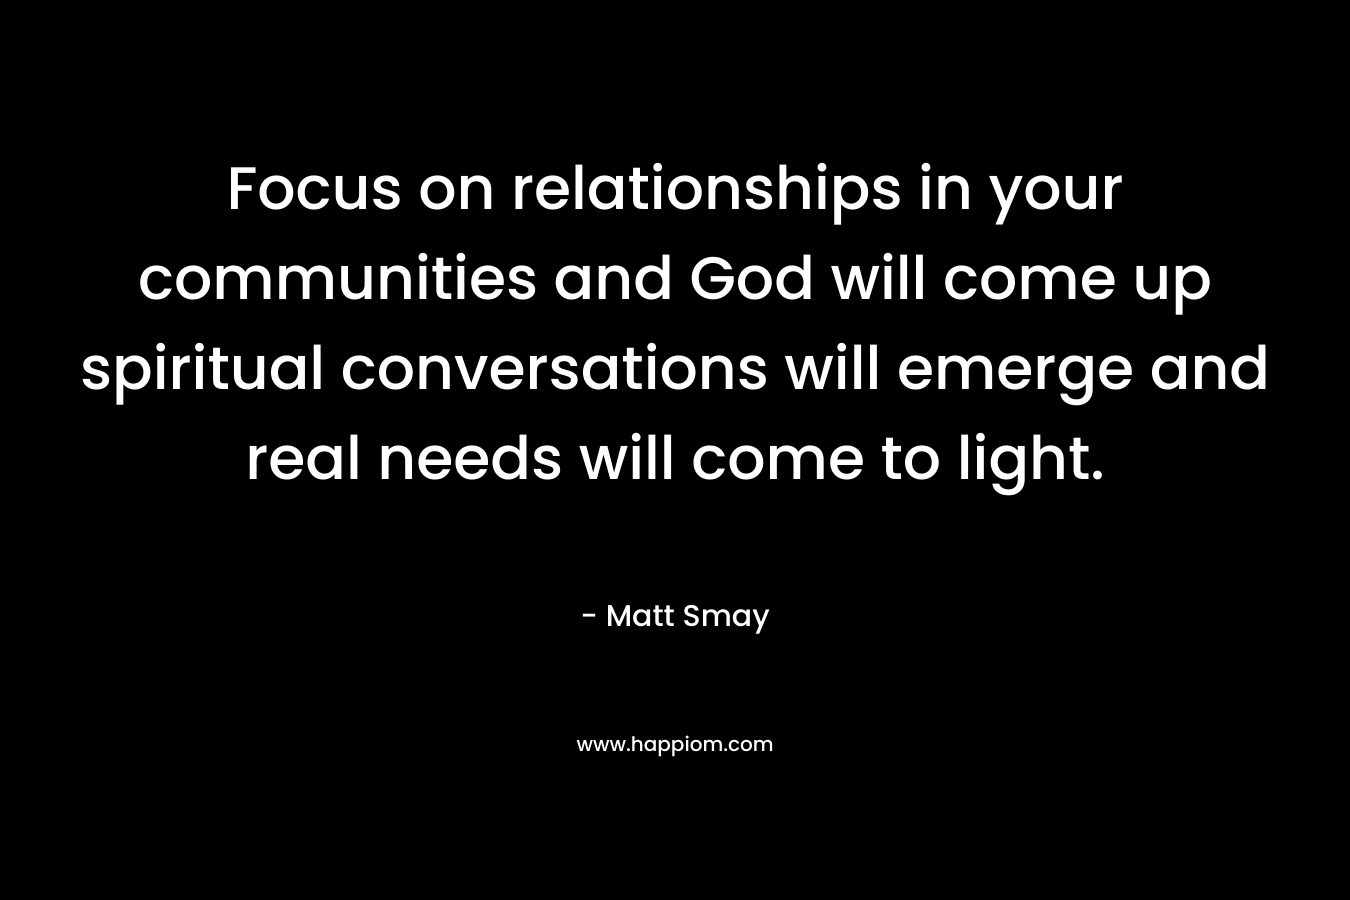 Focus on relationships in your communities and God will come up spiritual conversations will emerge and real needs will come to light.